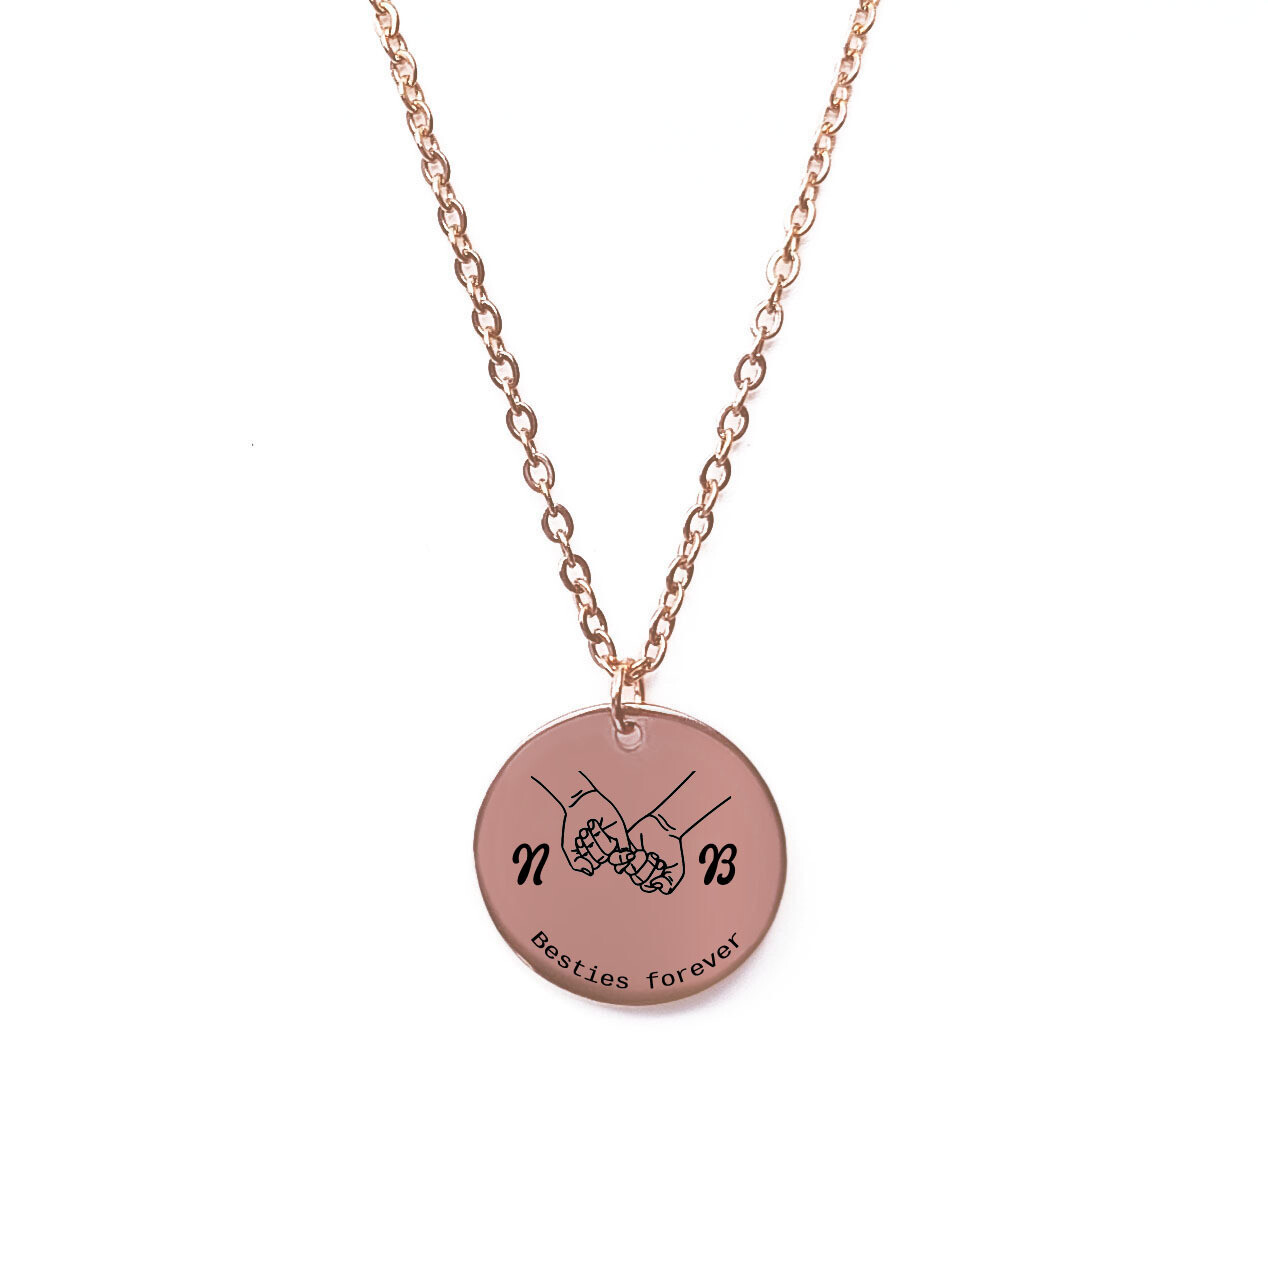 Personalised Engraved Besties Friendship Rose Gold Necklace